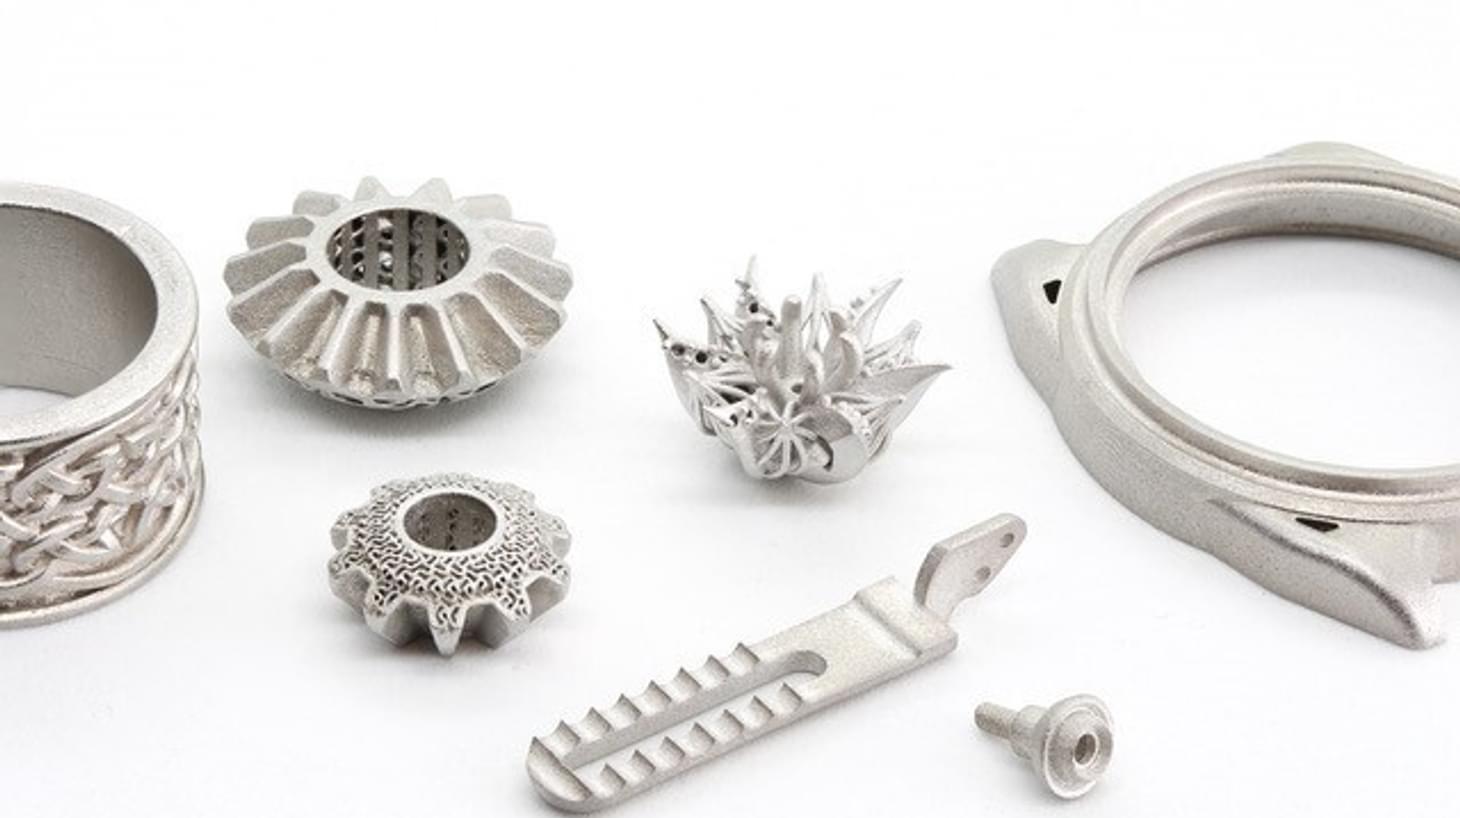 3D printed metal parts and artifacts